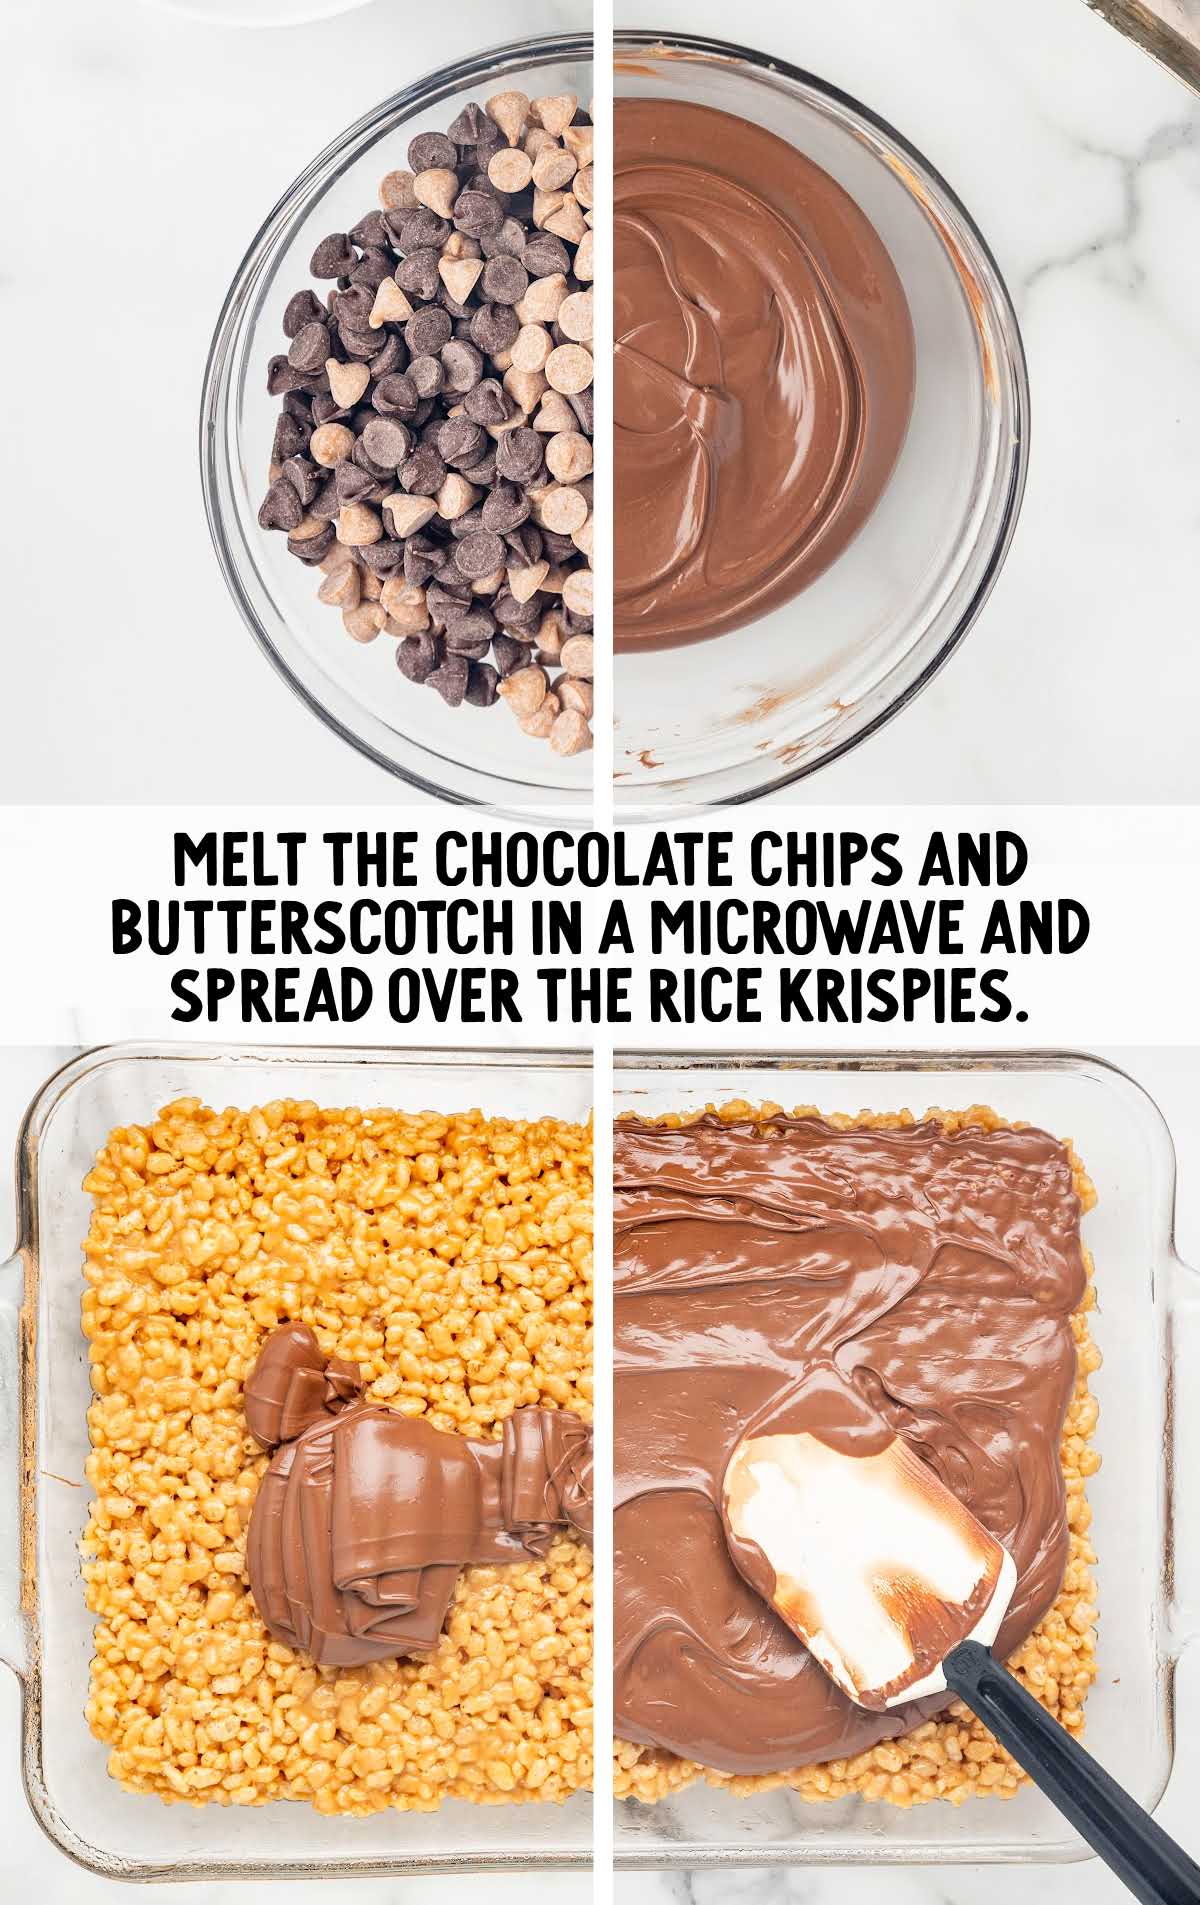 chocolate chips and butterscotch melted together and spread on top of the rice krispies